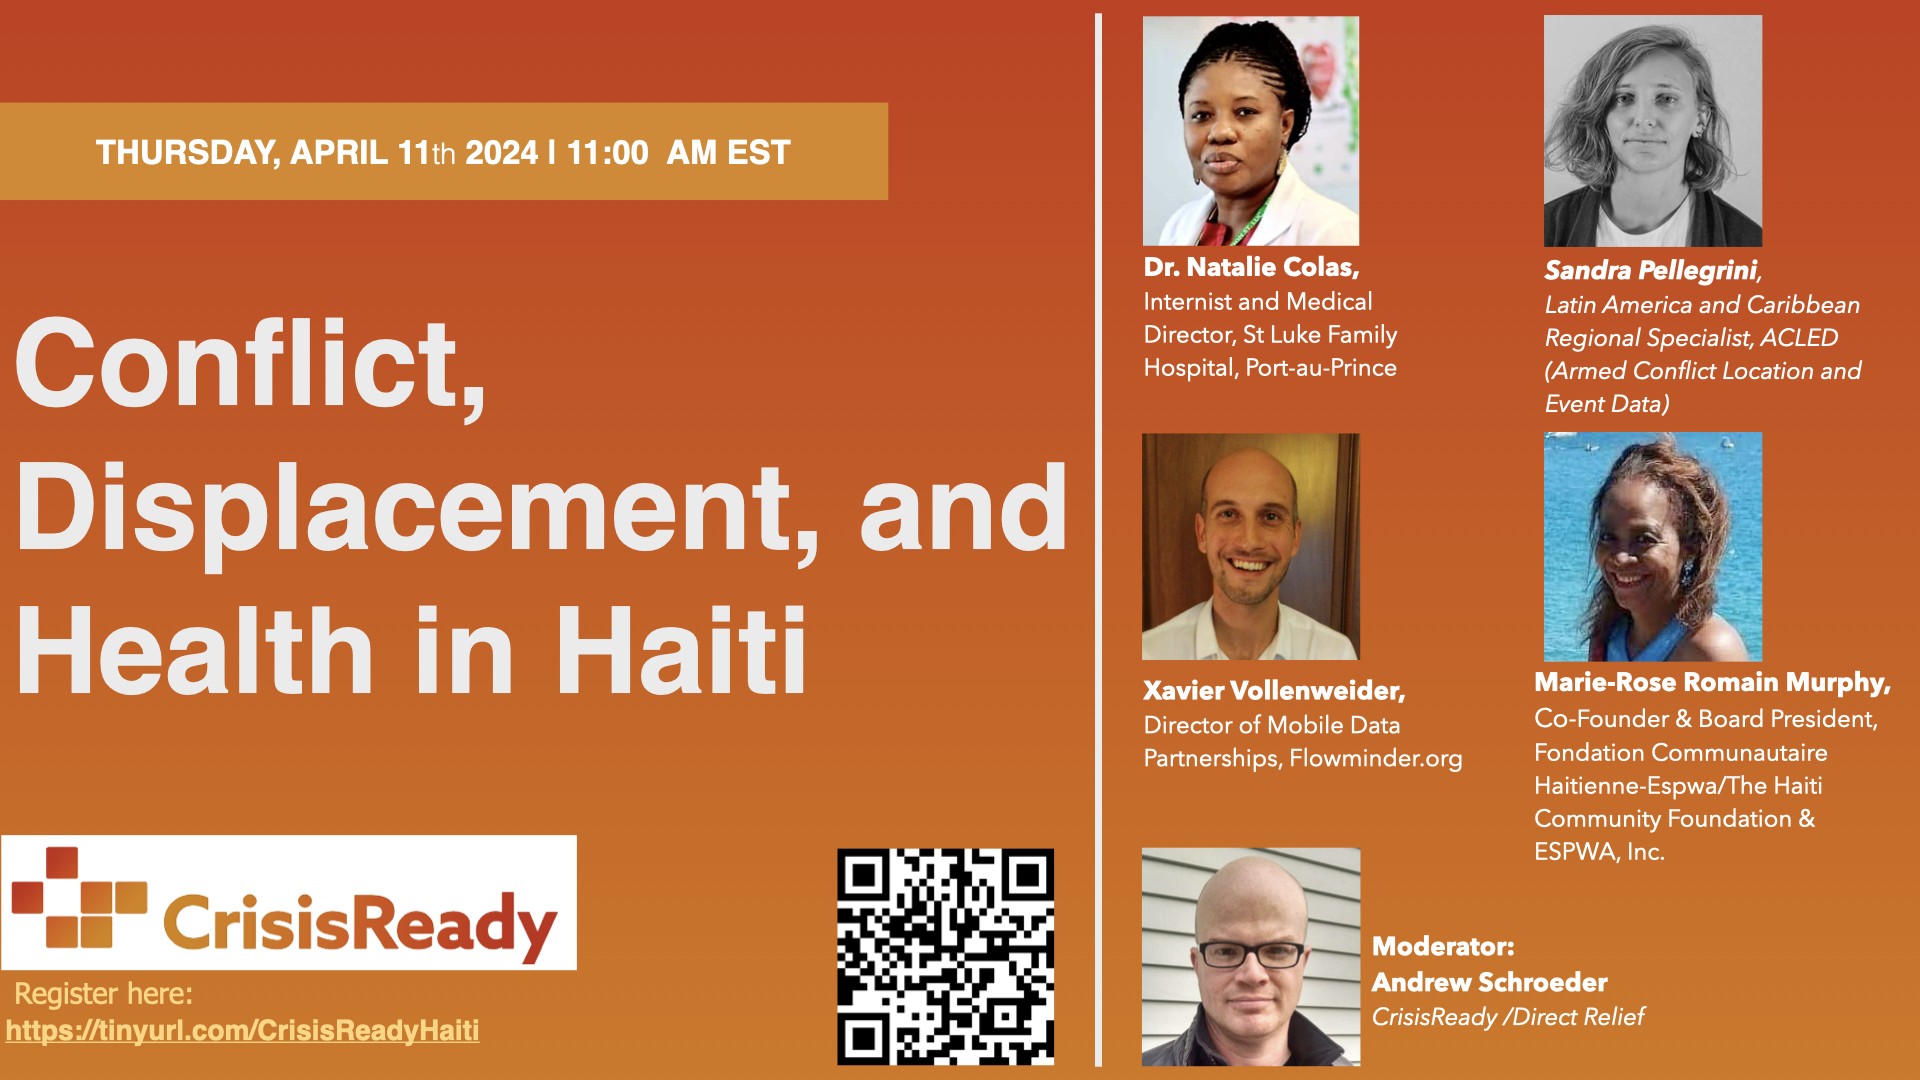 CONFLICT, DISPLACEMENT, AND HEALTH IN HAITI; Includes event details outlined on website